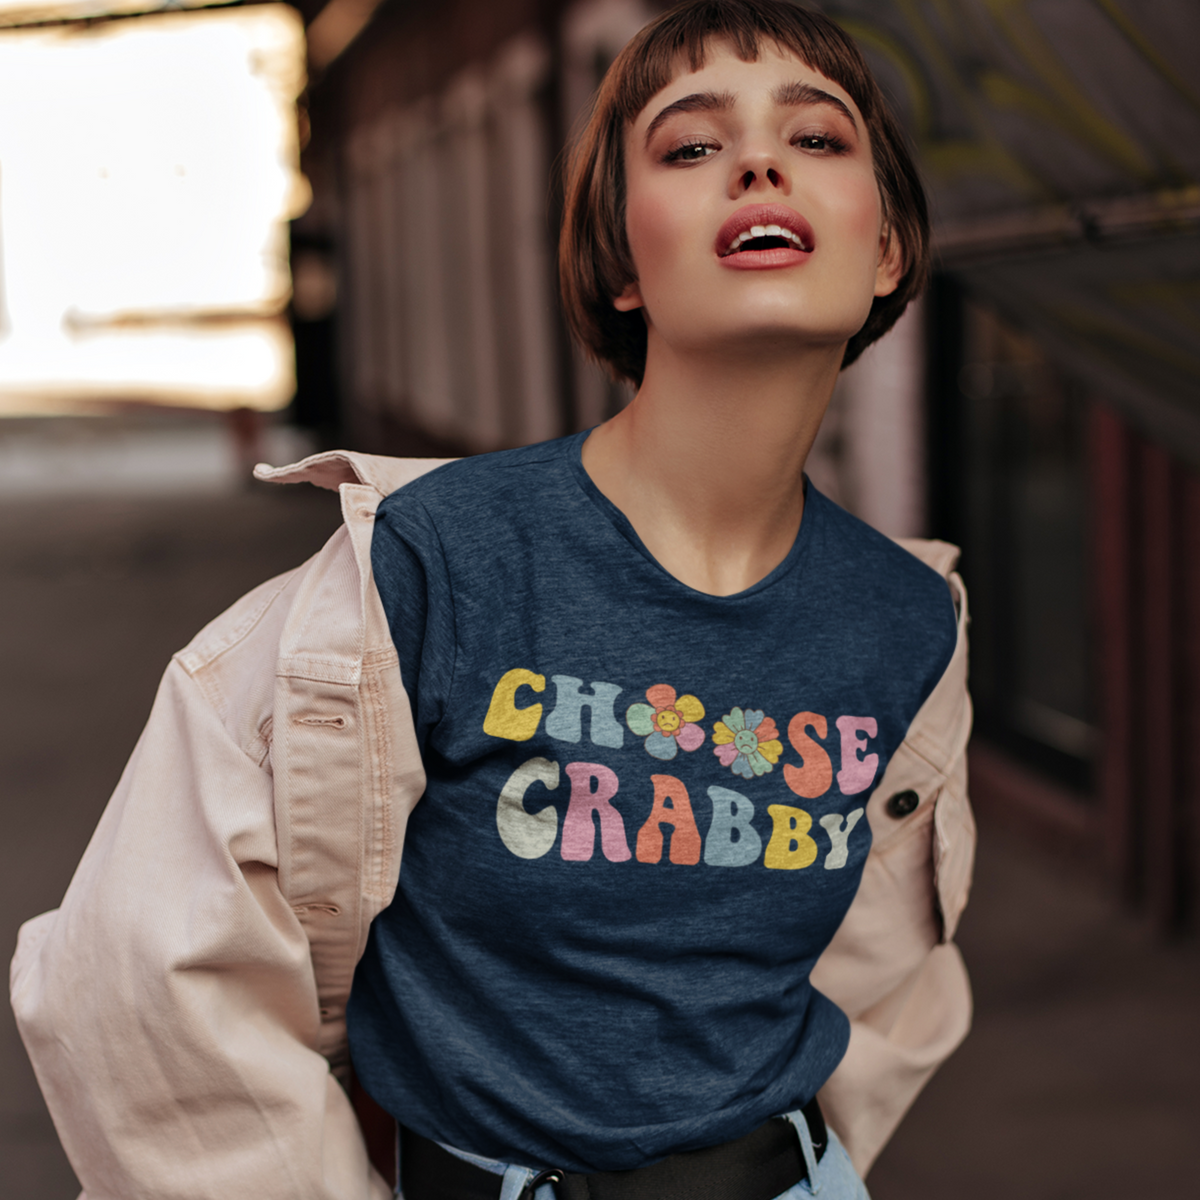 Choose Crabby Shirt | Funny Antisocial Shirt | Funny Gift for Her  | Unisex Soft style T-Shirt